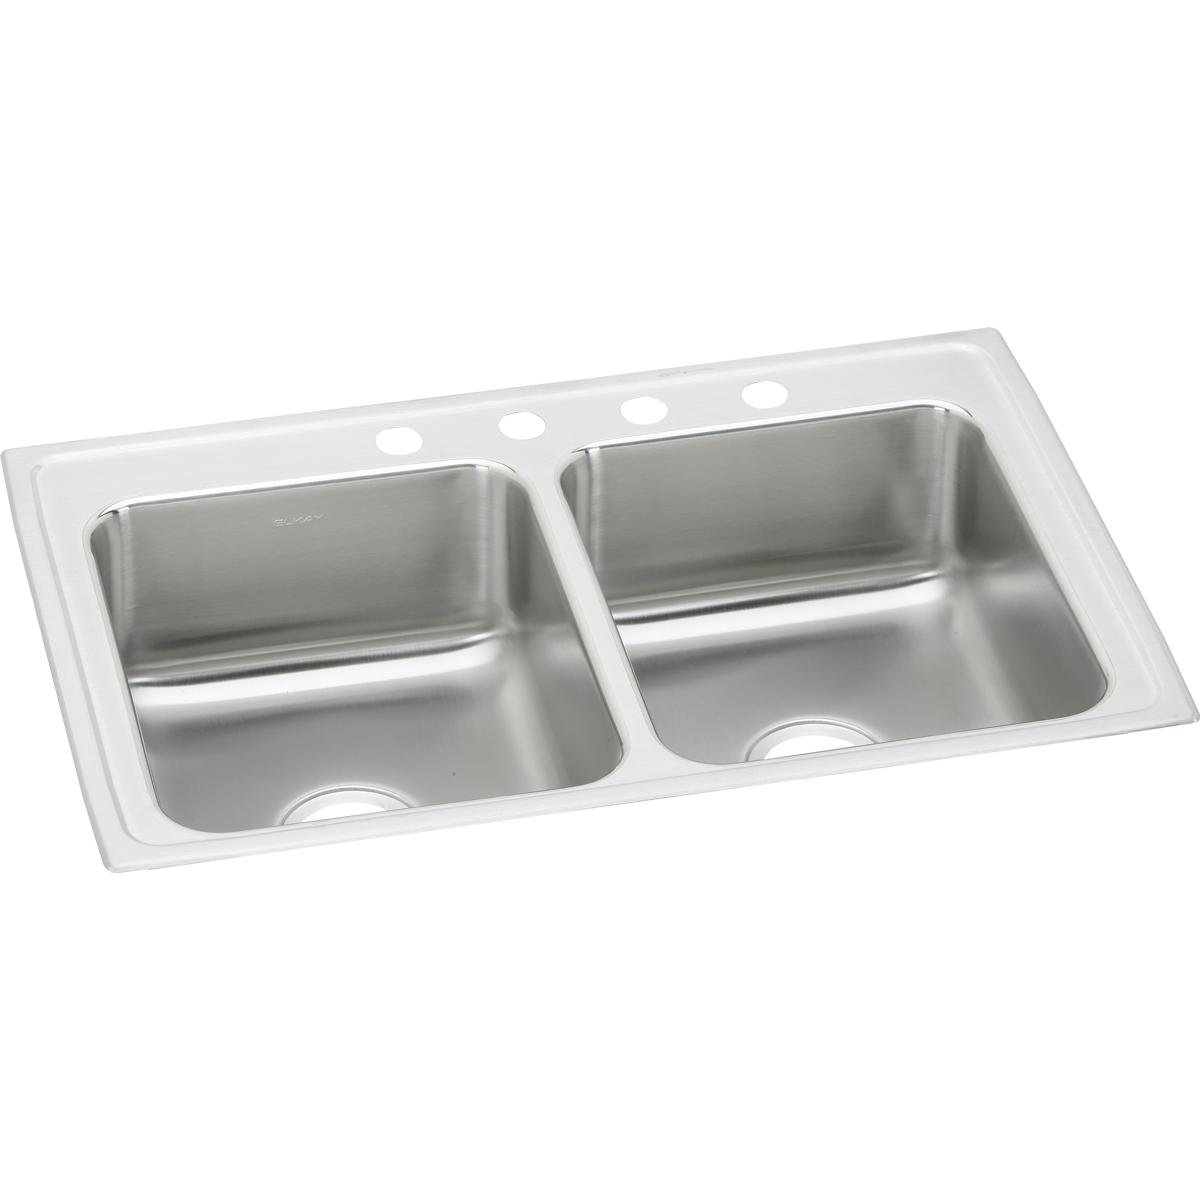 Elkay Lustertone Classic 43" x 22" x 7-5/8" Equal Double Bowl Stainless Steel Drop-in Sink